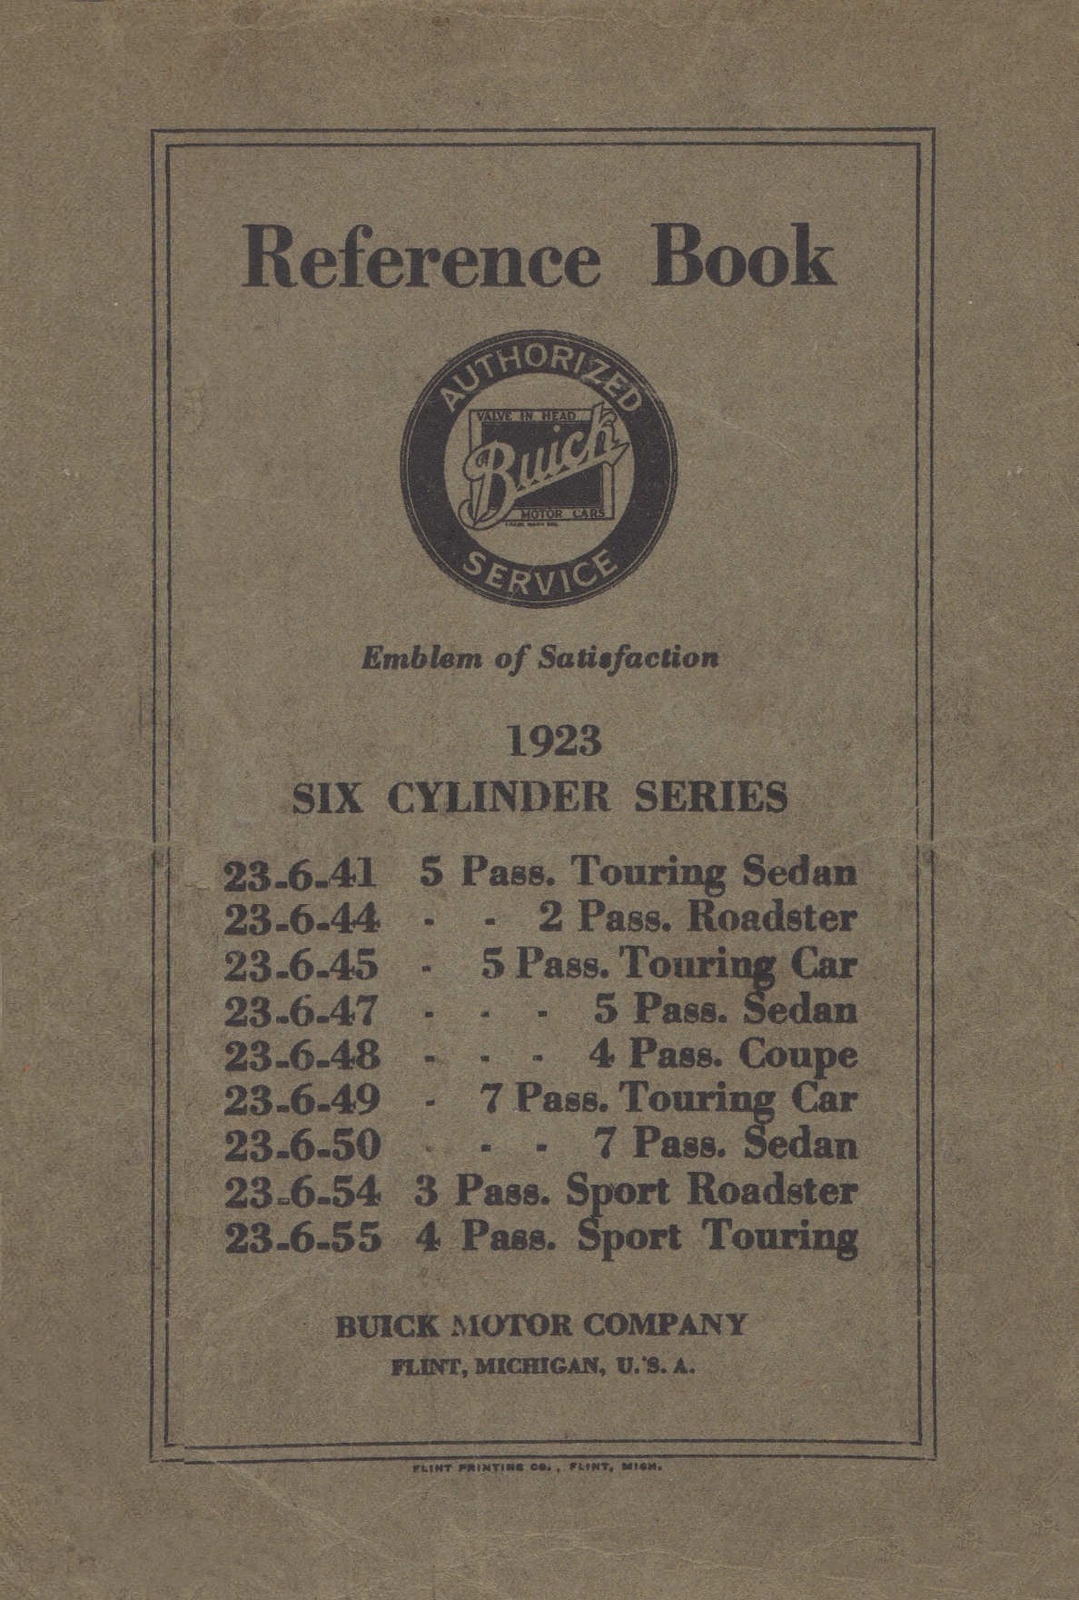 n_1923 Buick 6 cyl Reference Book-00.jpg